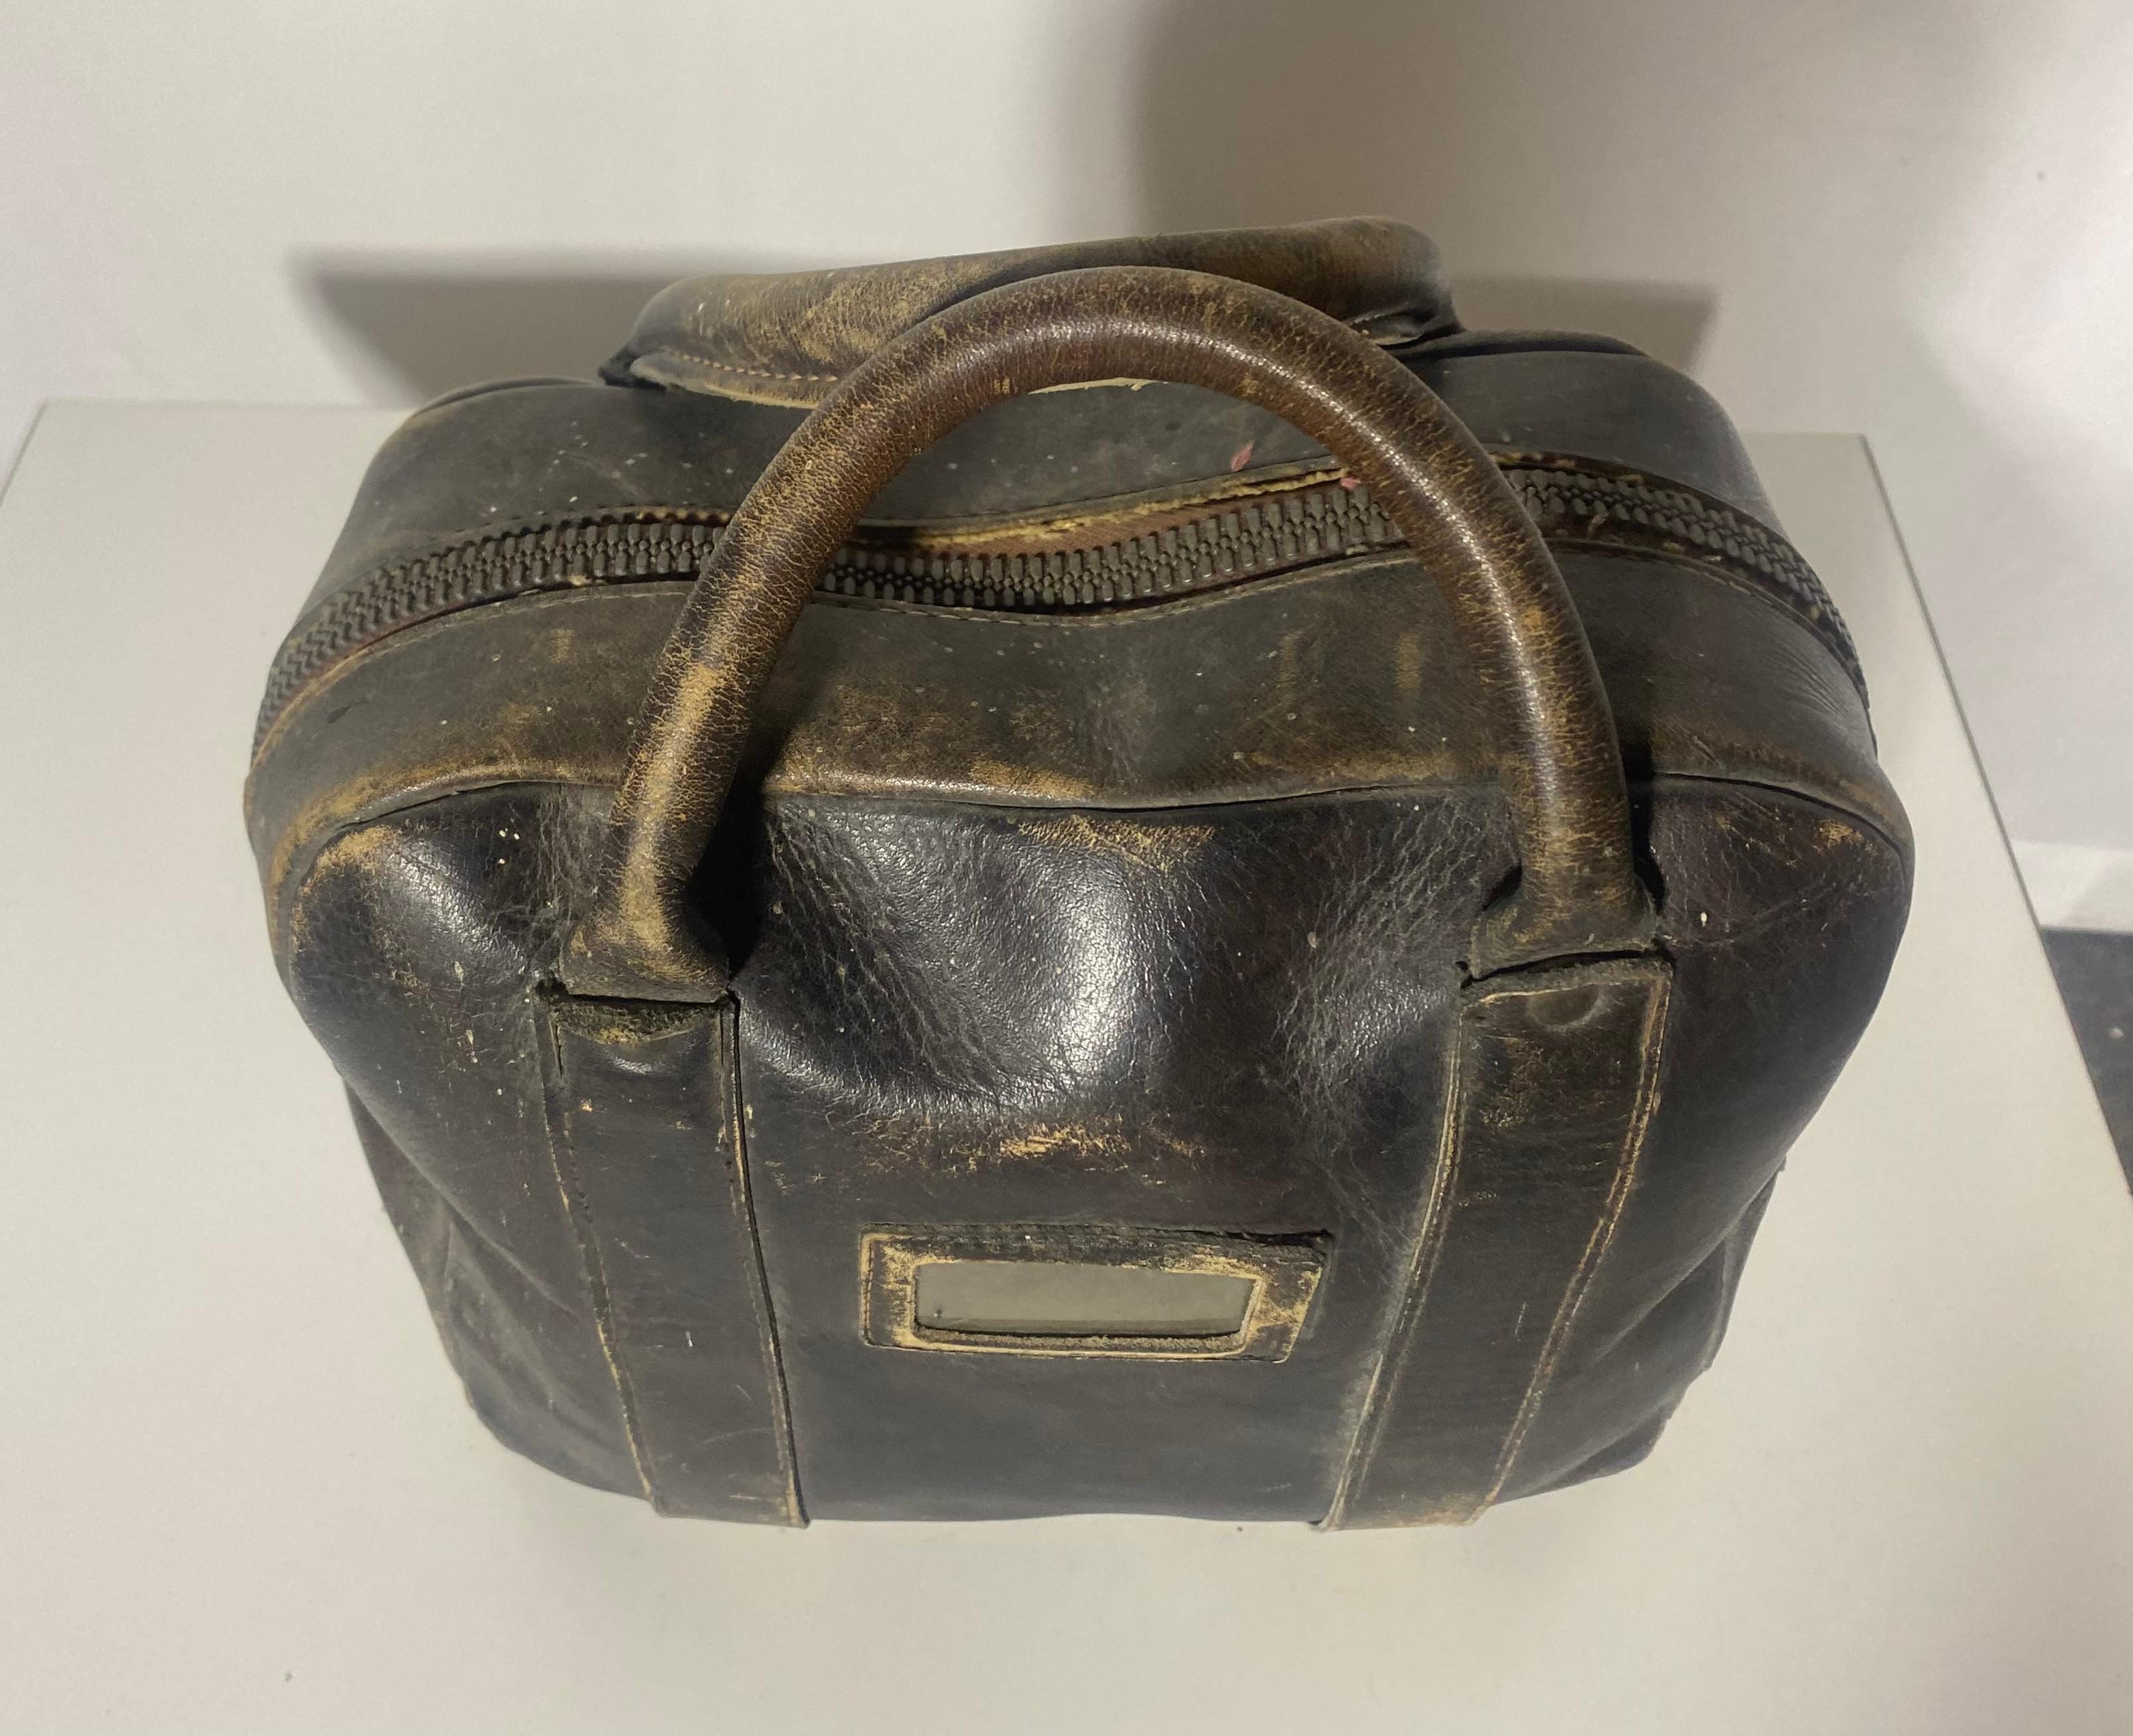 1930s /40s W.D. Hensell & Sons Bocci (Lawn) Balls with original leather bag In Good Condition For Sale In Buffalo, NY